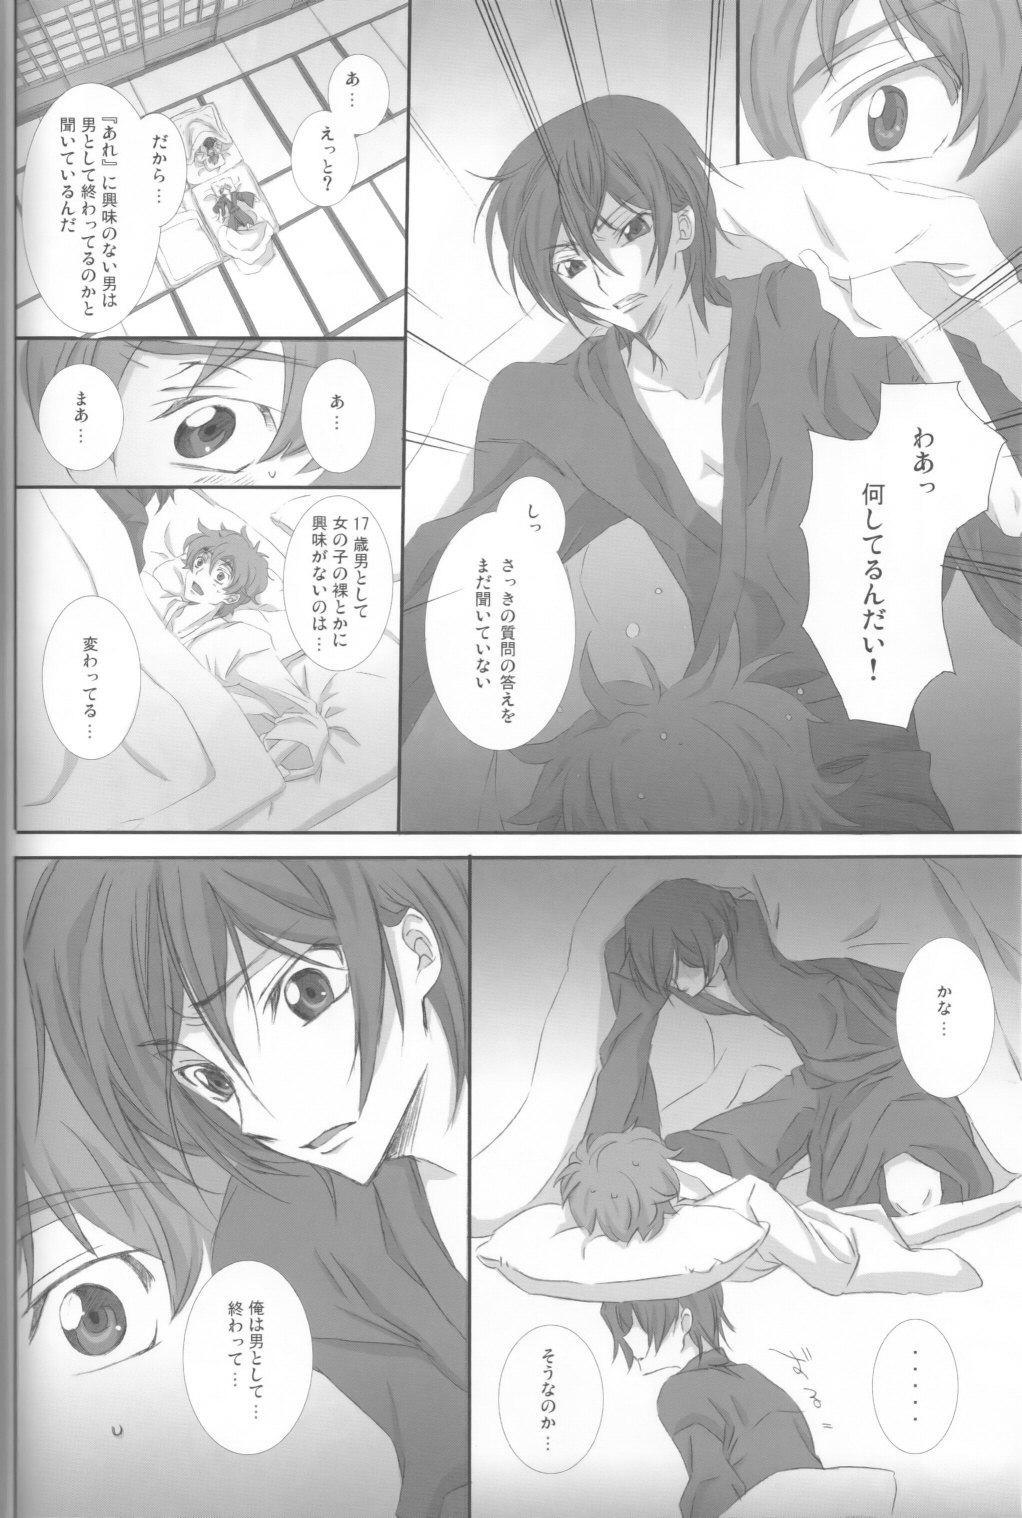 Stripping on・non・om - Code geass Casa - Page 11